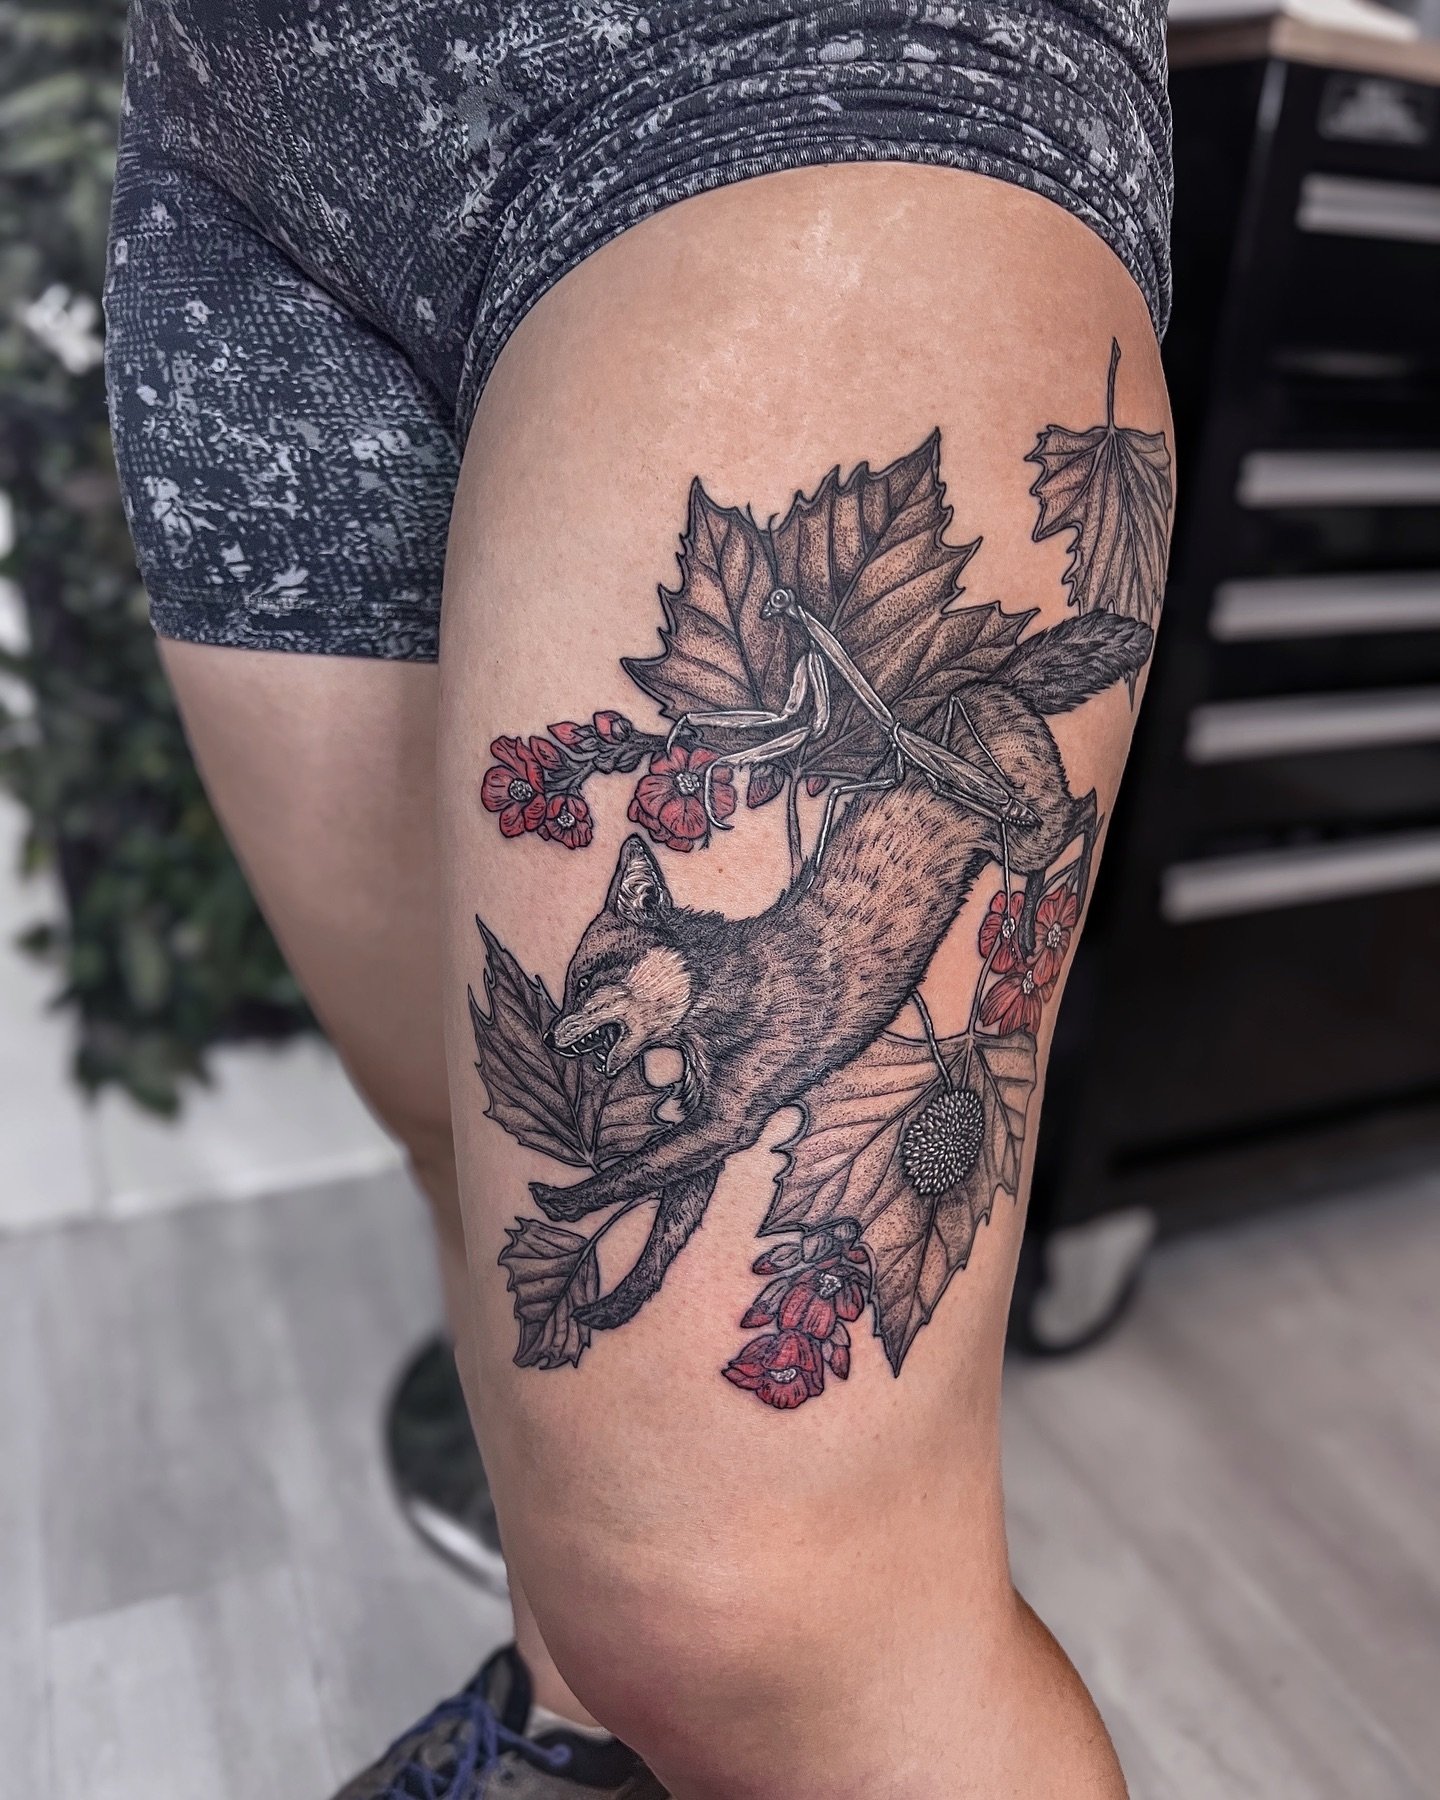 Running fox with mantis rider 🤠 plants are London plane tree and desert globe mallow. Lines healed, shading fresh. Thanks A!